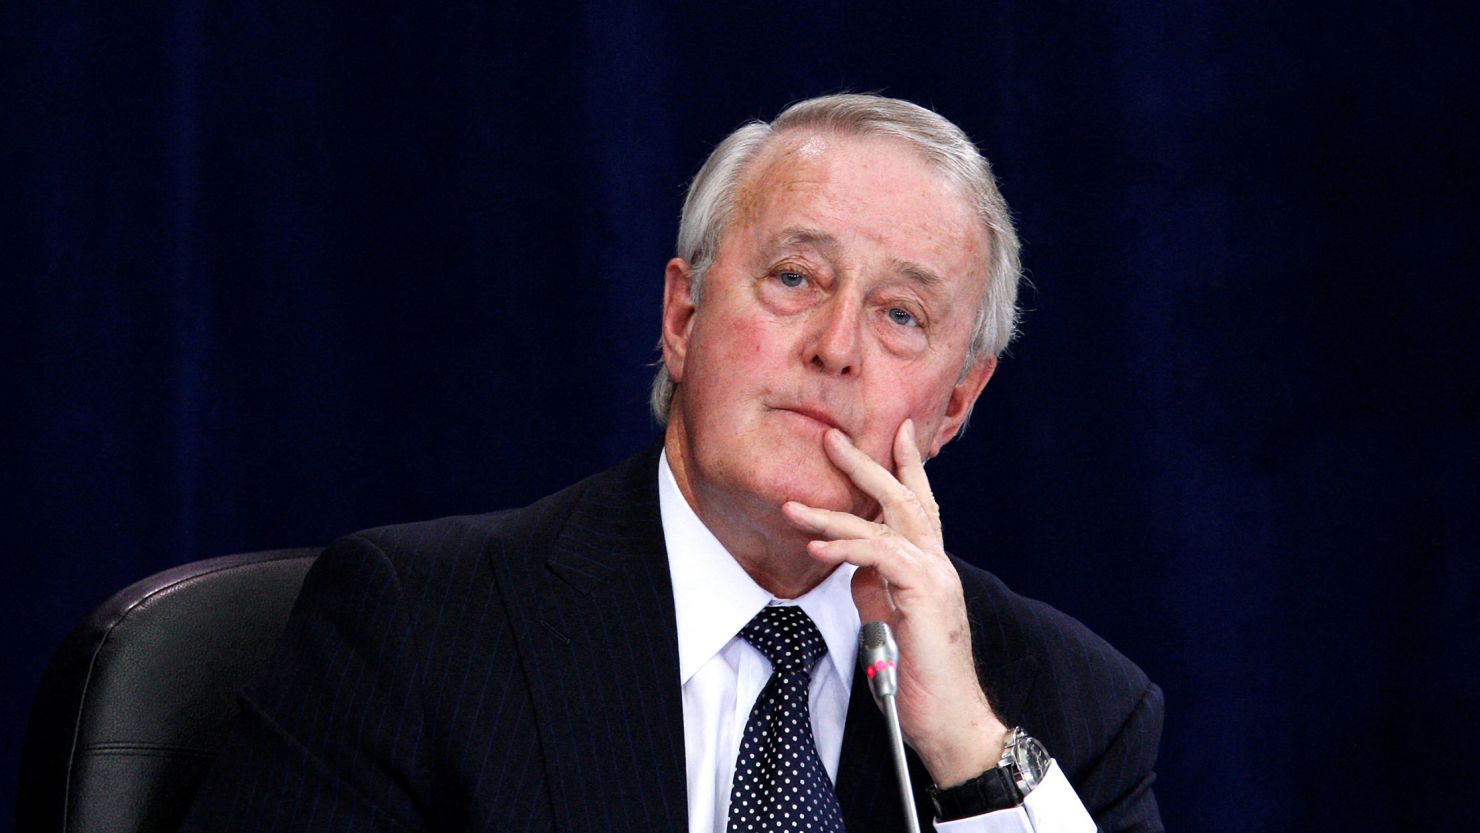 Former Canadian Prime Minister Brian Mulroney in Ottawa, Canada, on May 19, 2009.